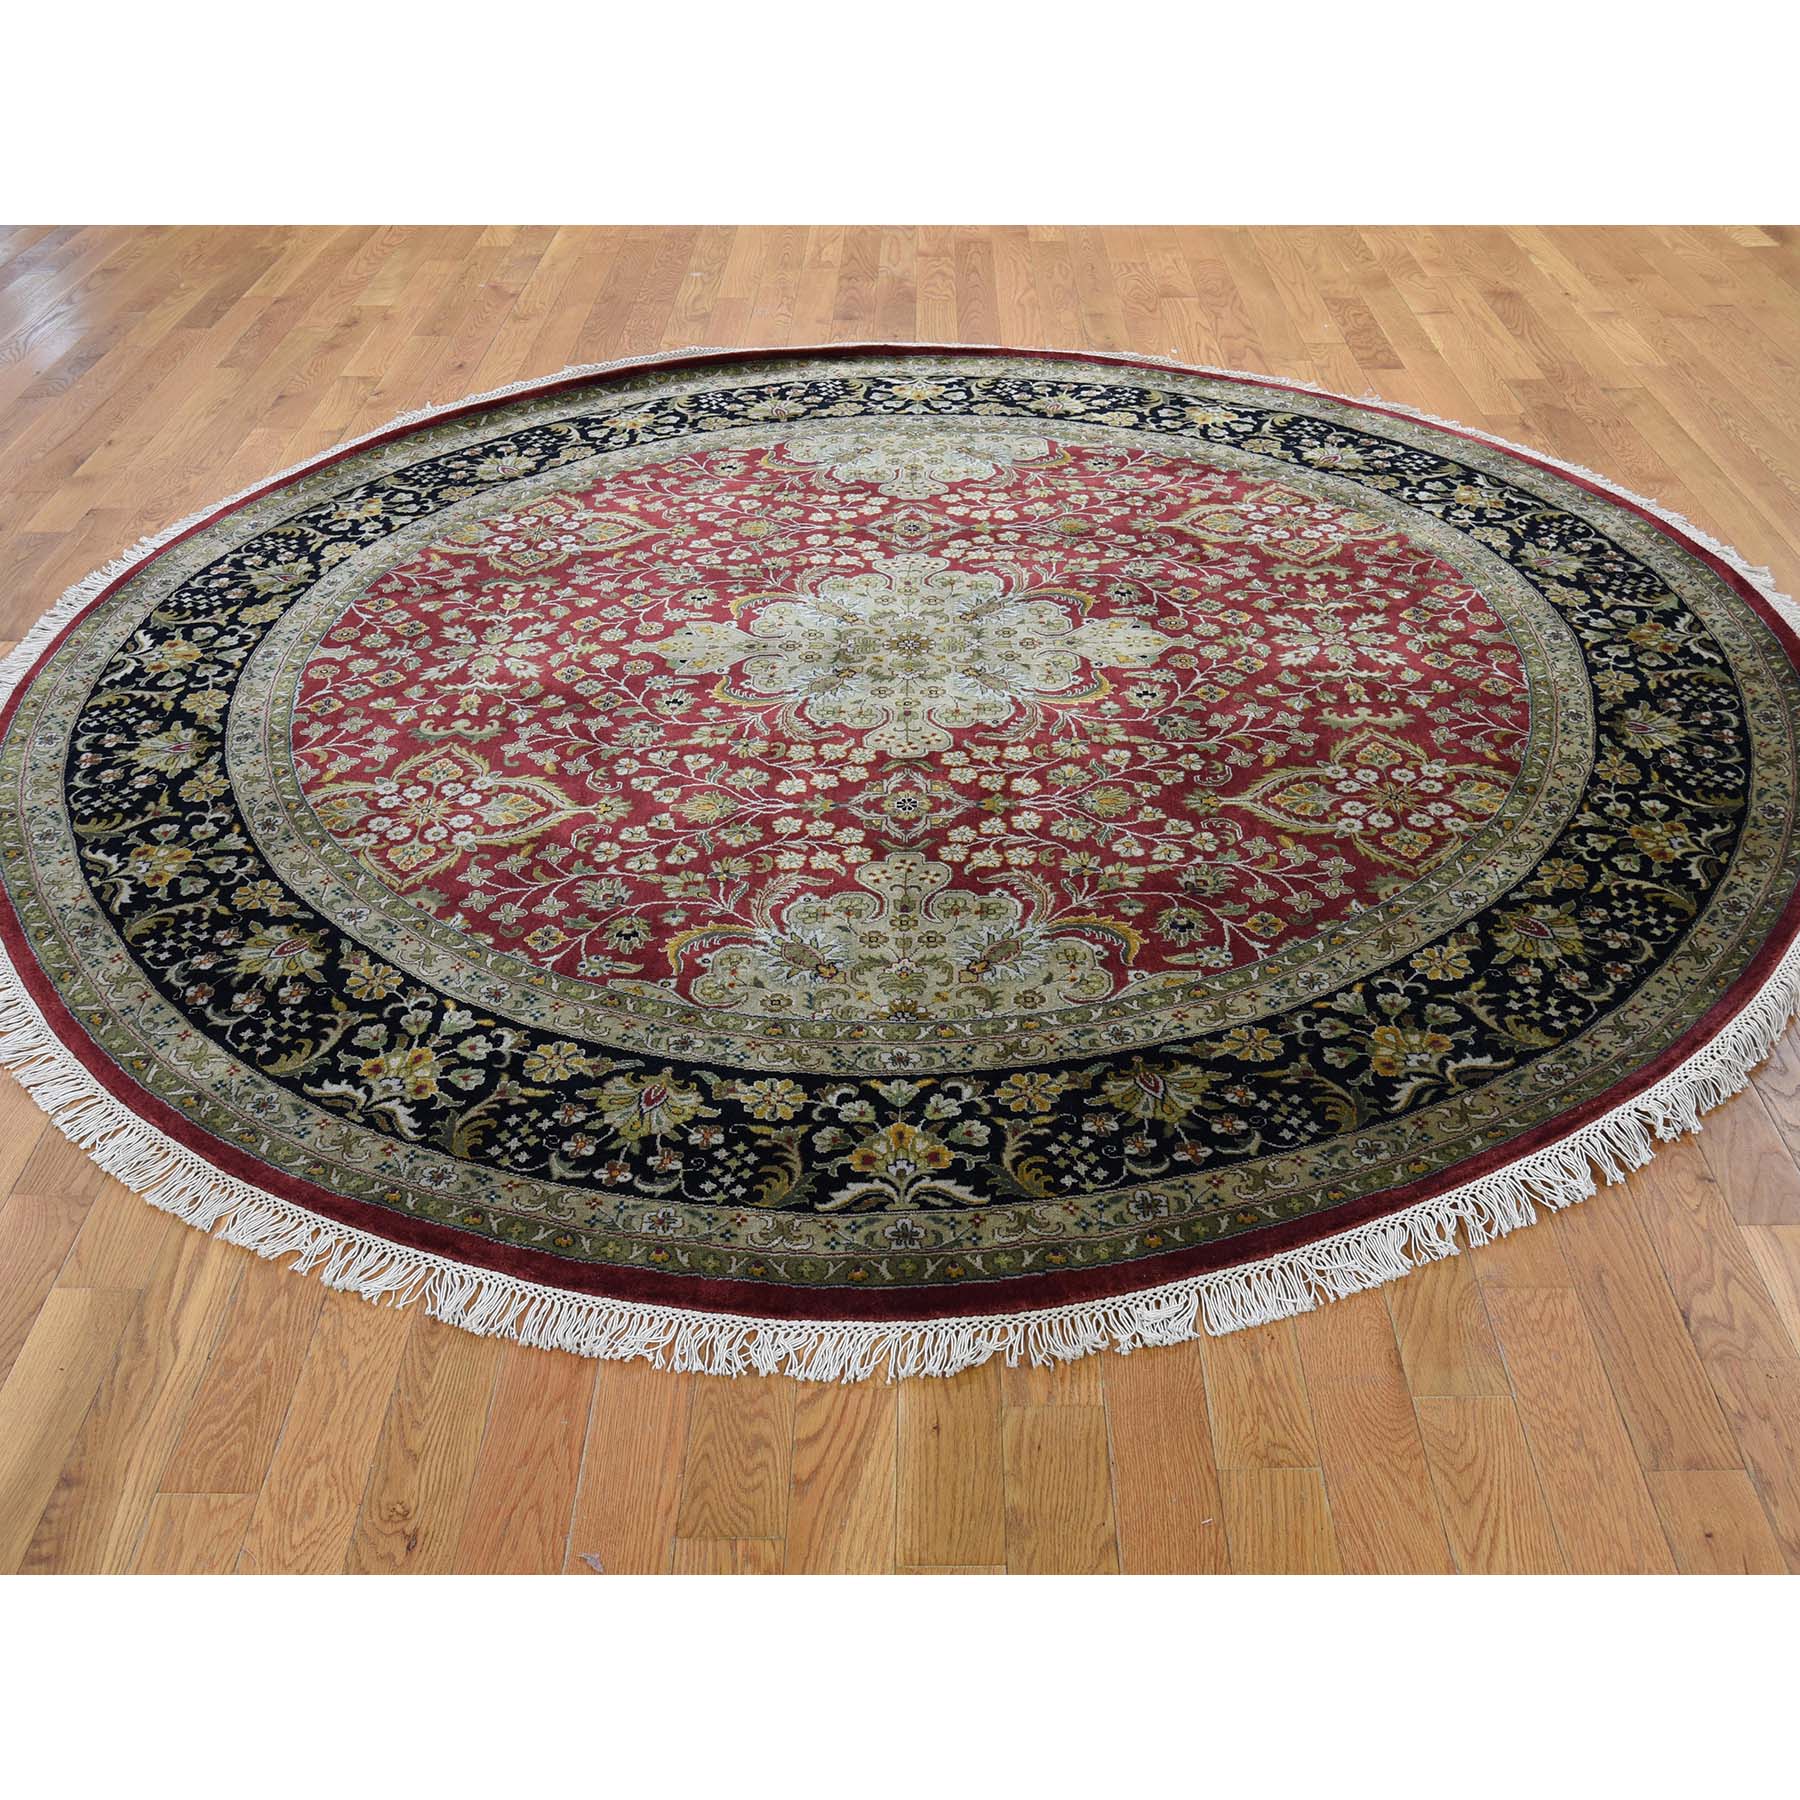 8-x8- New Zealand Wool 300 Kpsi Kashan Revival Round Hand-Knotted Oriental Rug 